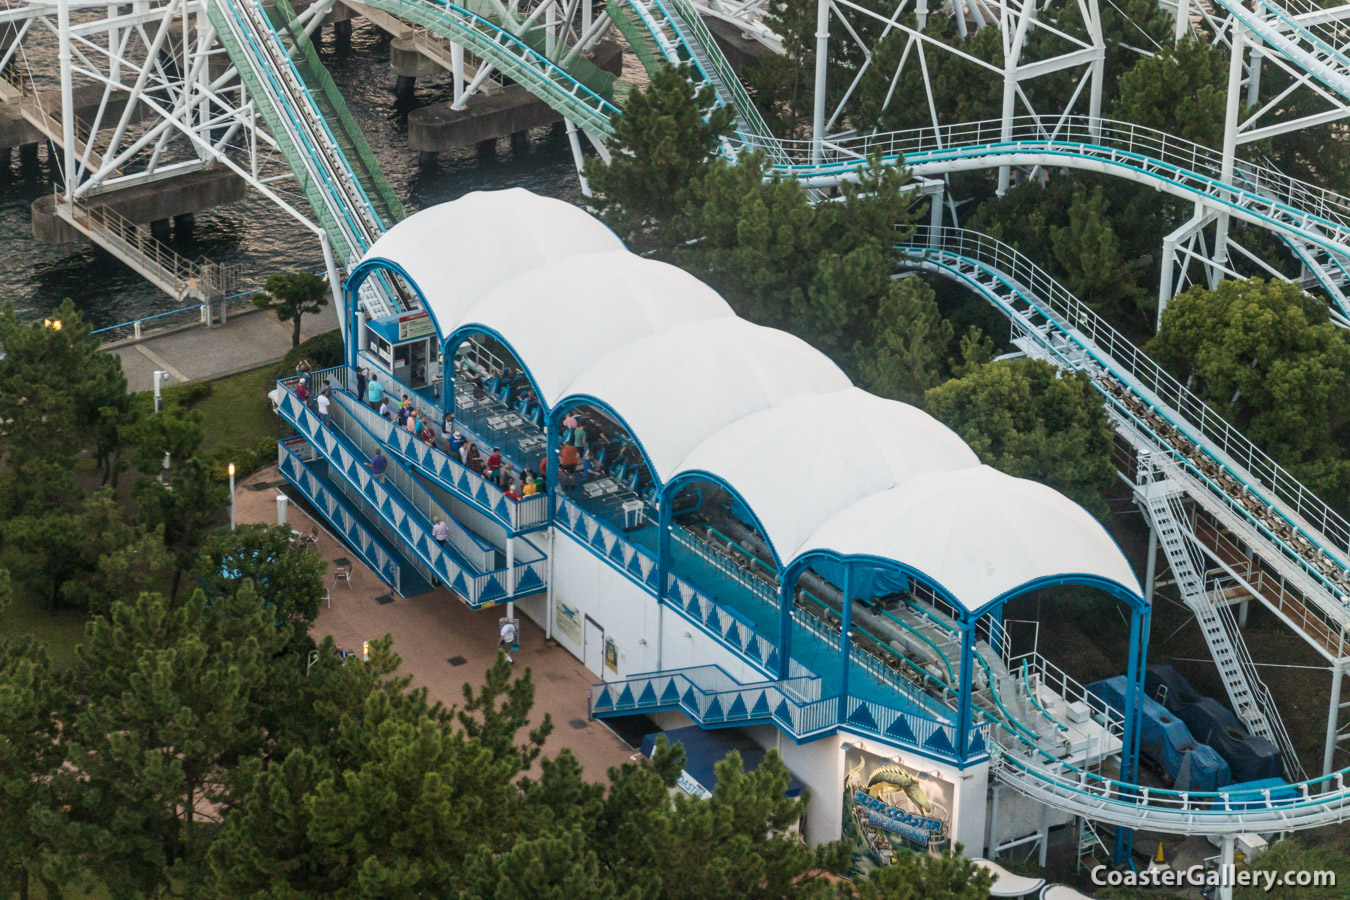 Pictures of the Surf Coaster Leviathan